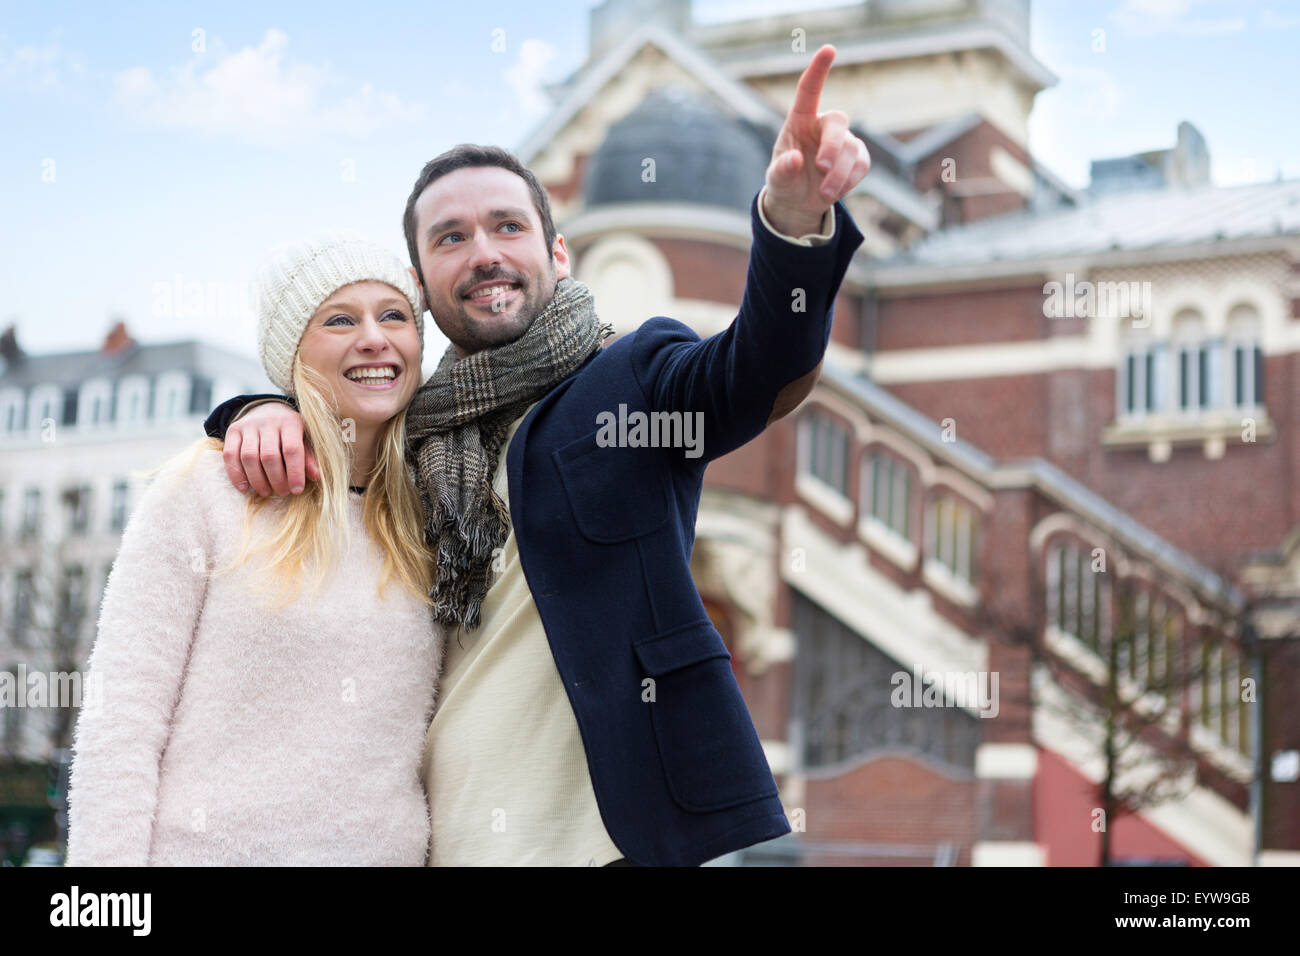 View of a Young attractive couple on holidays in city Stock Photo